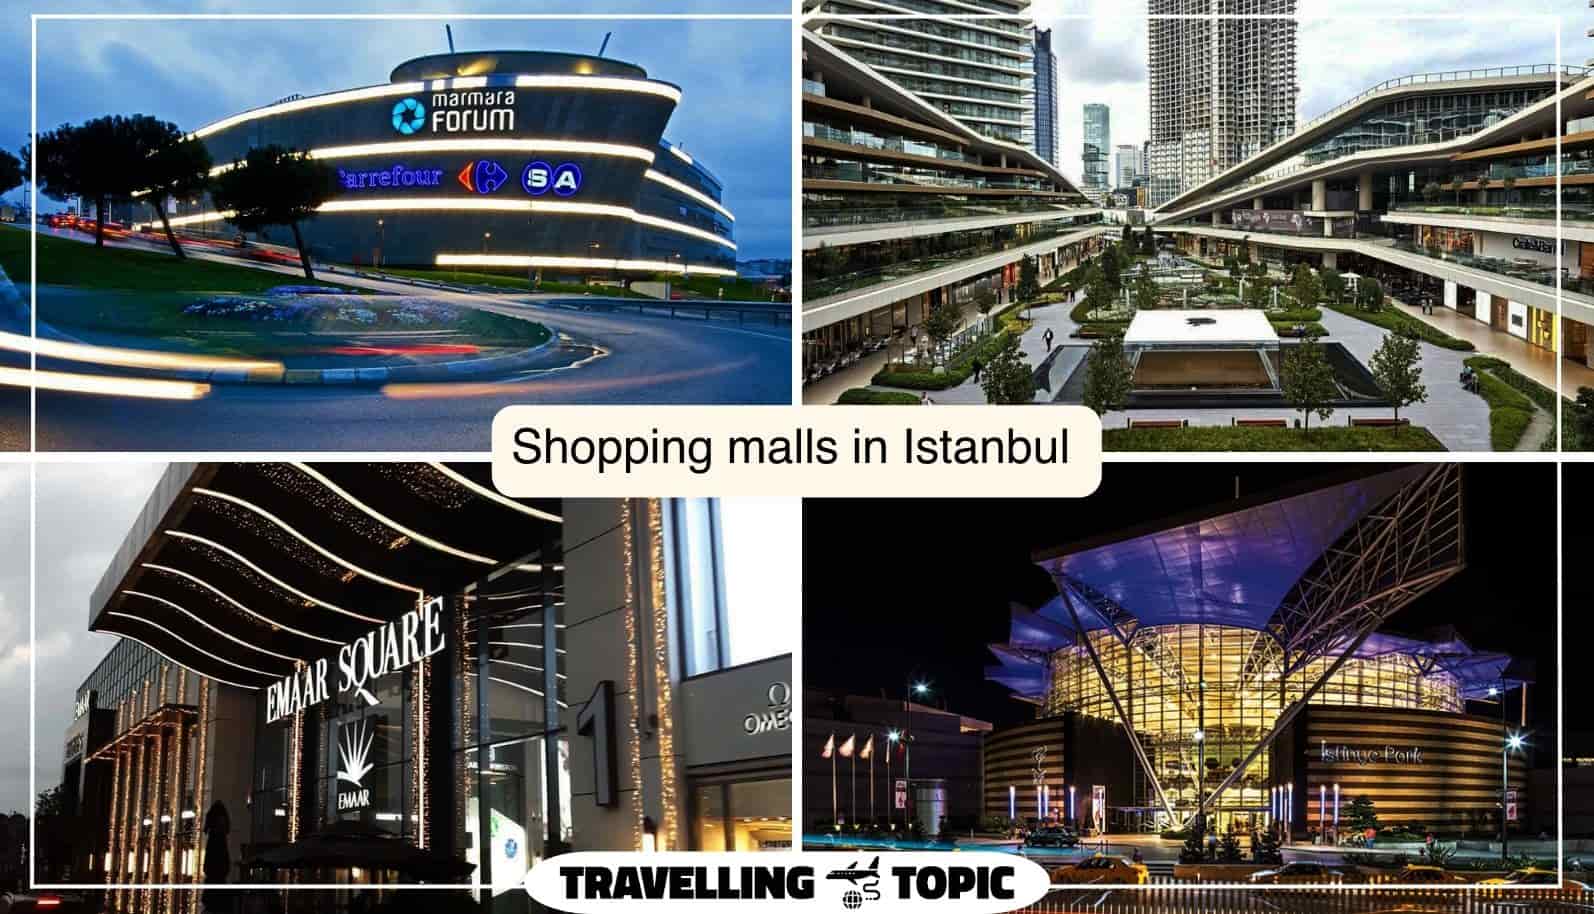 Shopping malls in Istanbul